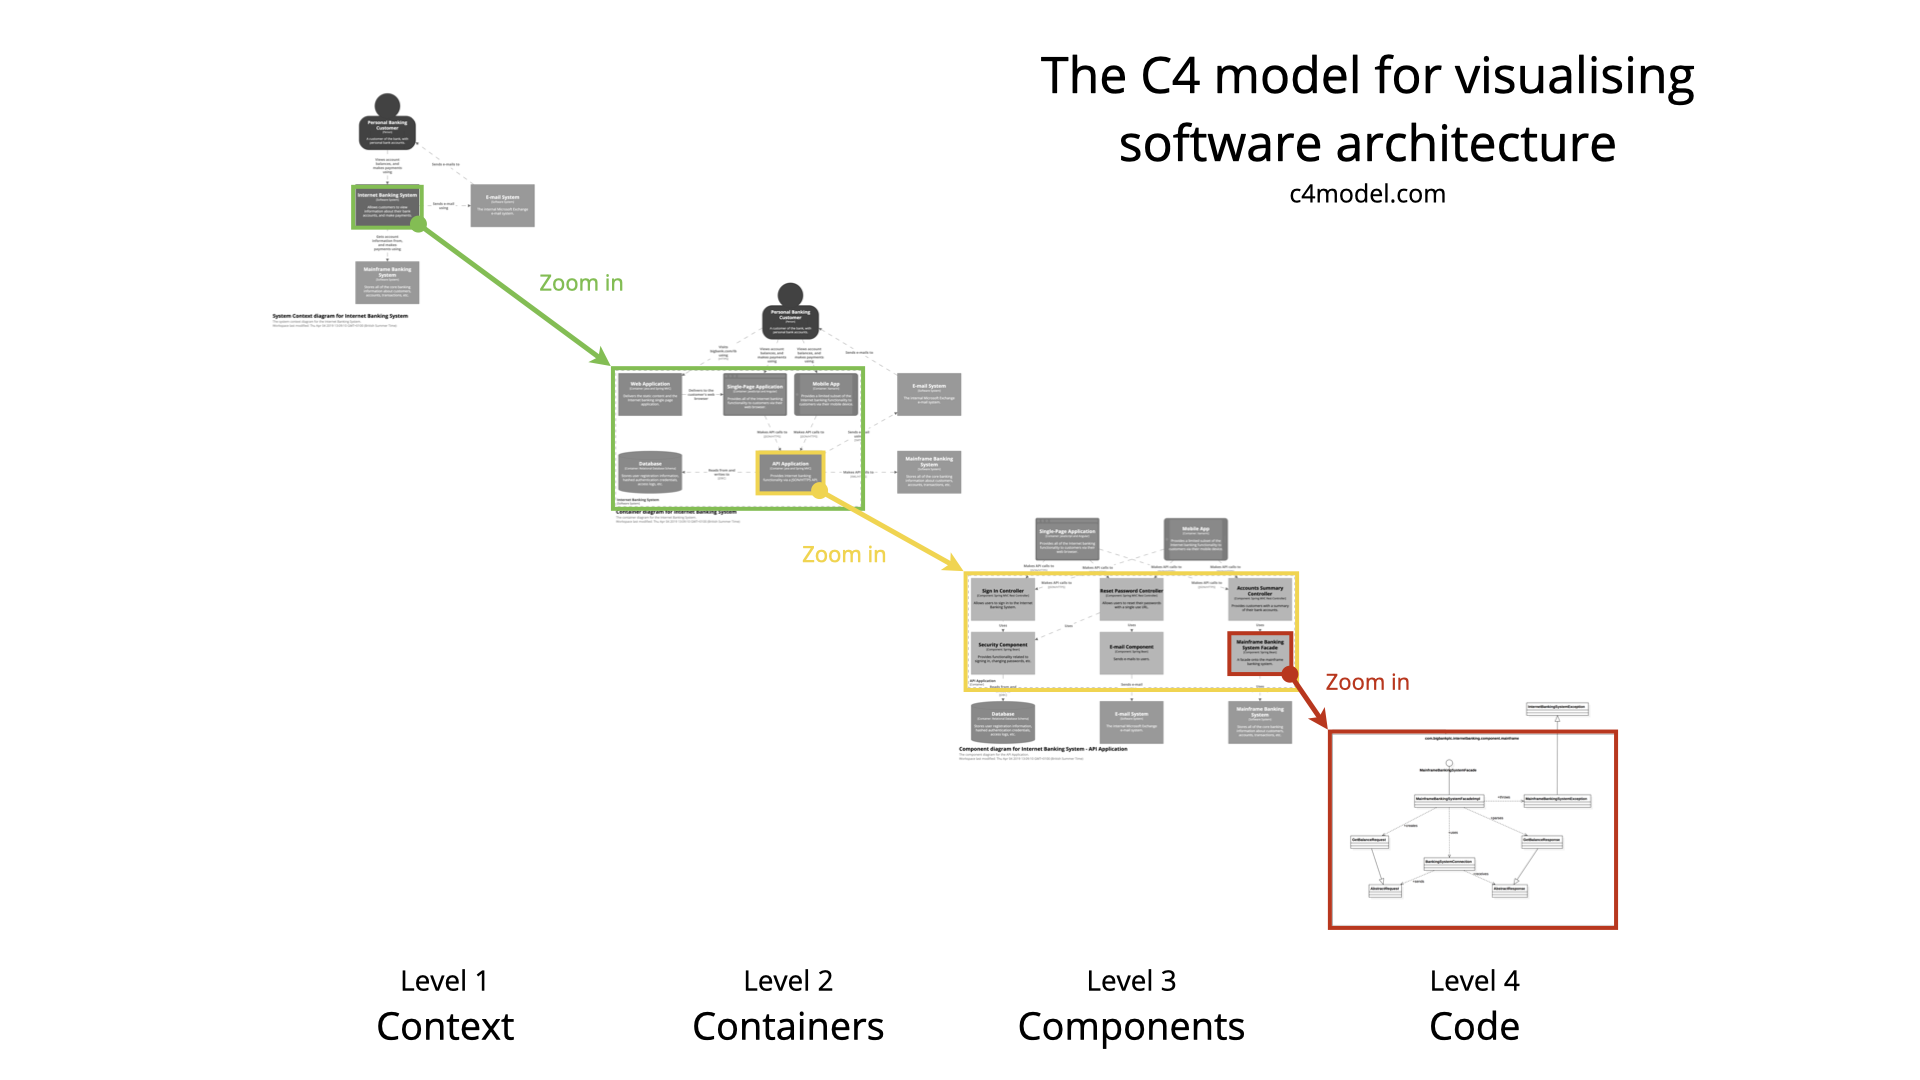 An overview of the C4 model